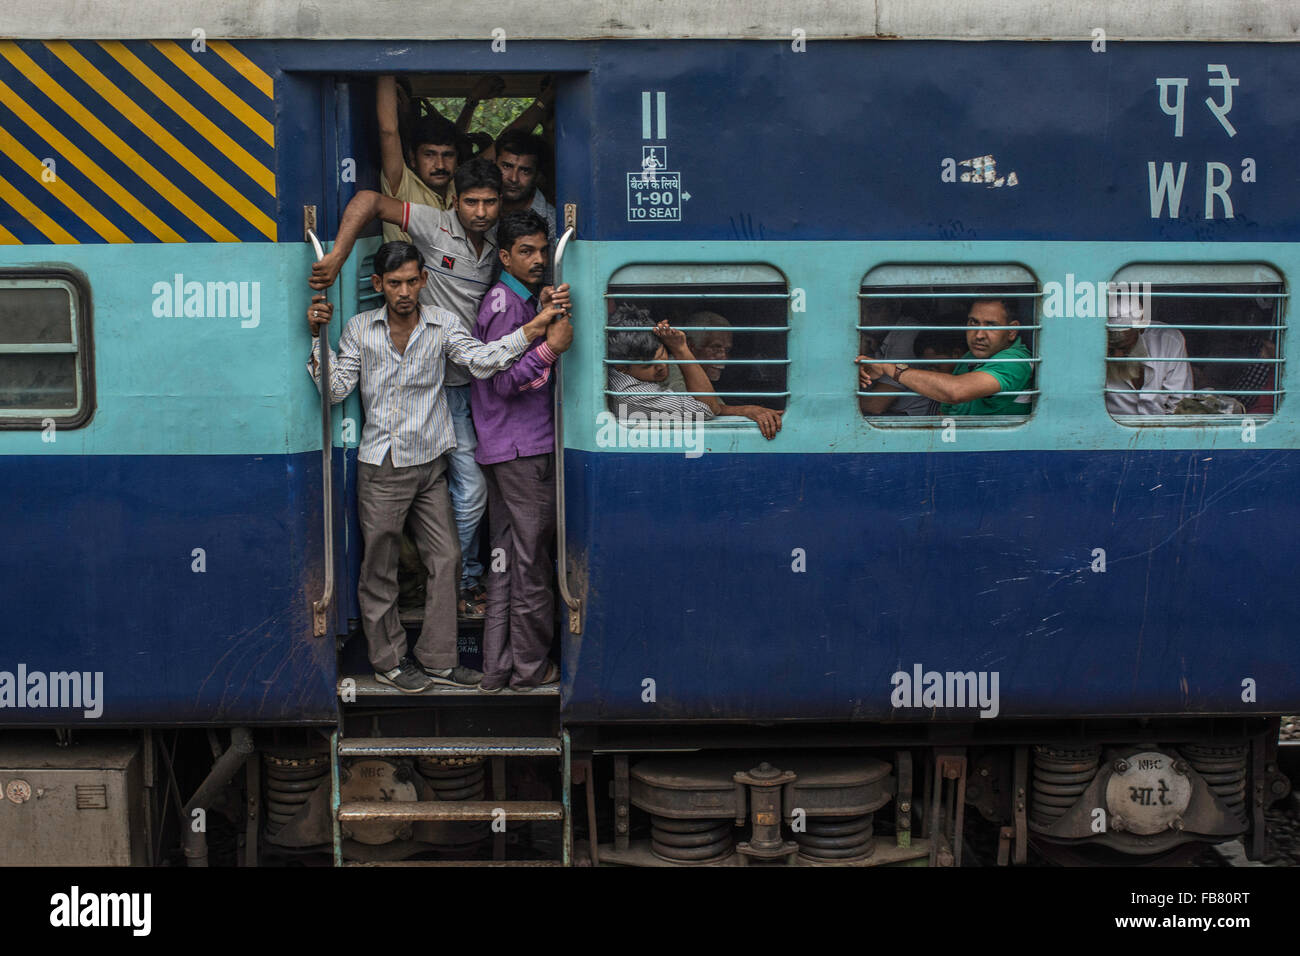 Passengers looking out of crowded train. Indian Railways, Rajasthan, India. Stock Photo